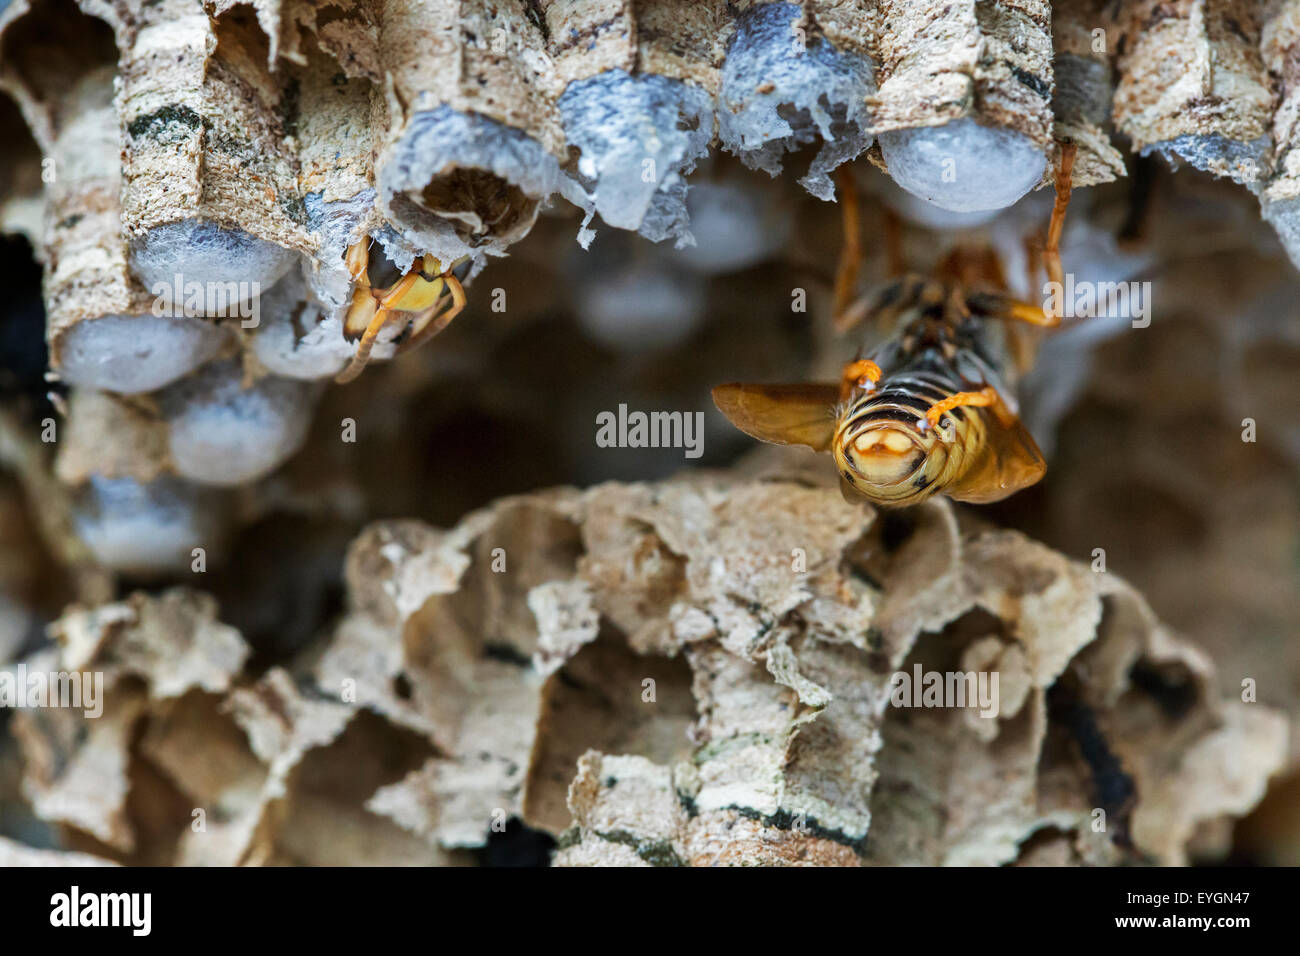 European hornets (Vespa crabro) emerging from brood cells in paper nest Stock Photo